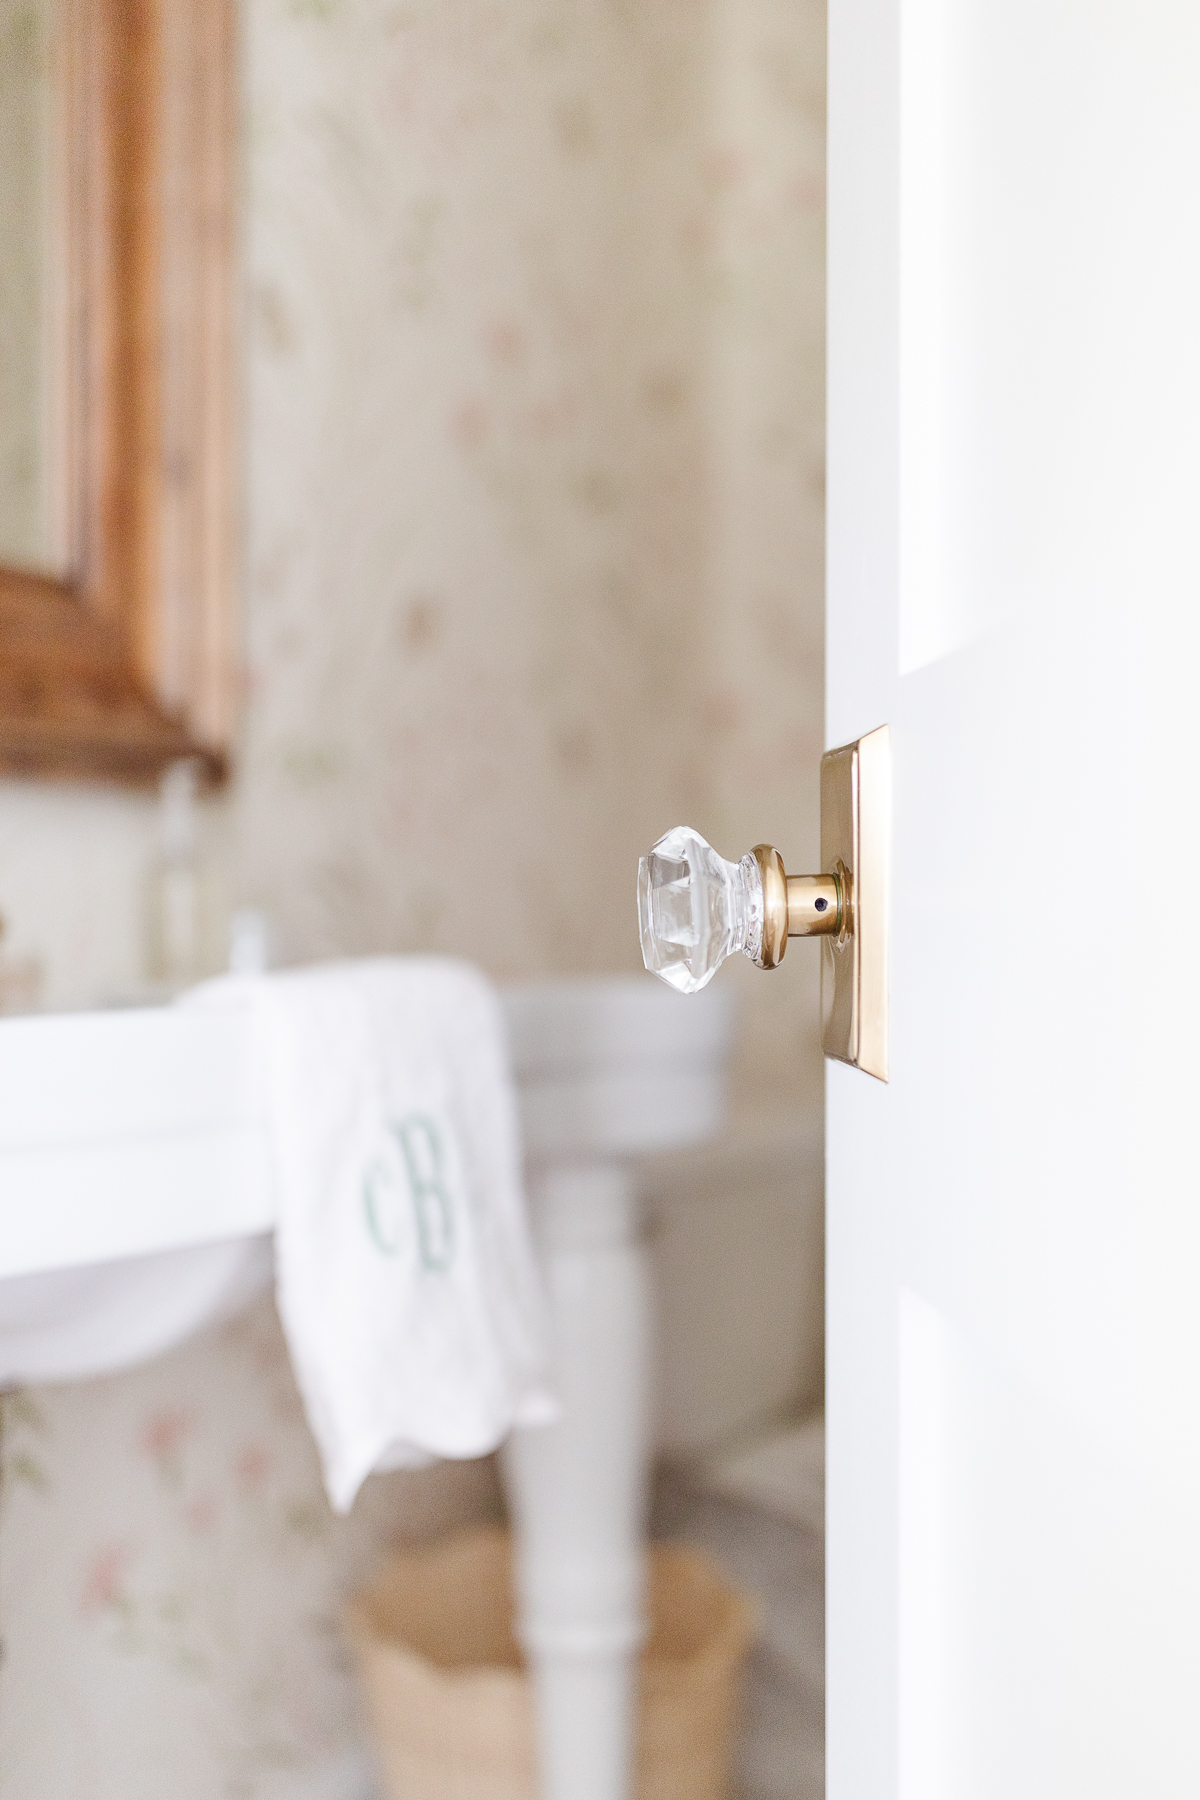 A white door with a brass and glass knob, looking into a wallpapered bathroom.